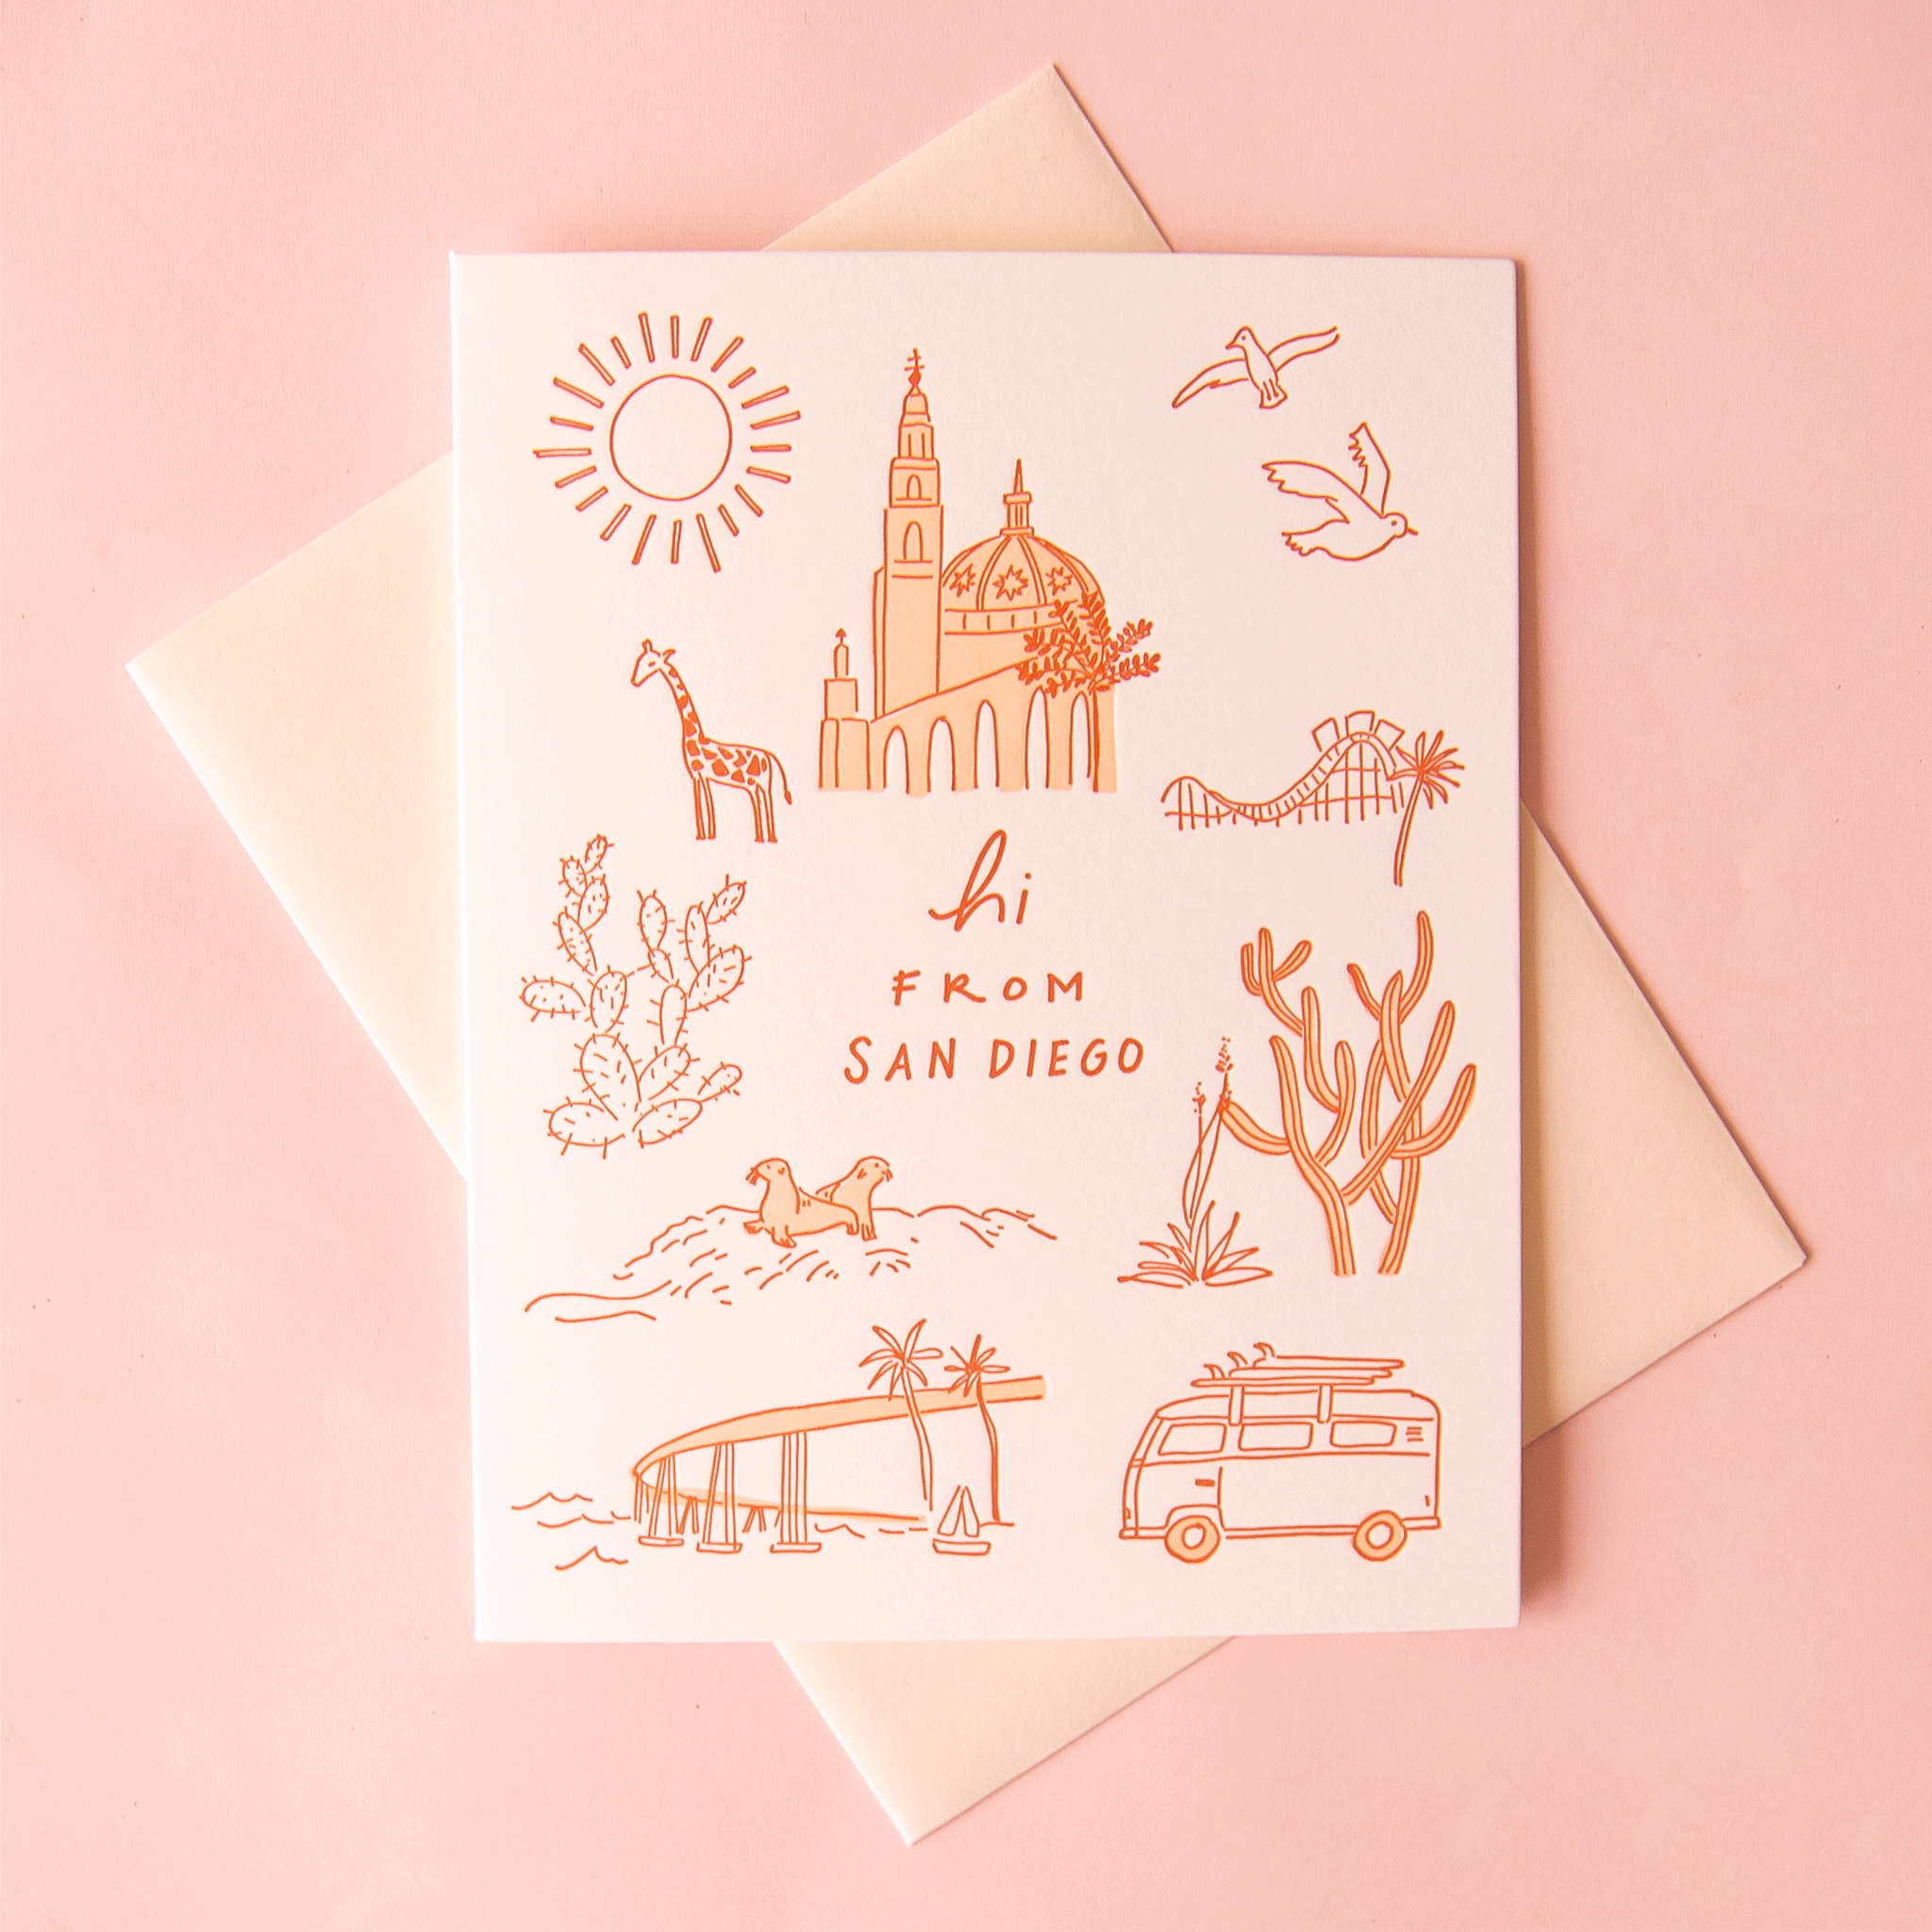 Photo of a greeting card that reads "hi from san diego" in rust letters on a white background. There are also rust colored simple line drawings of San Diego landmarks surrounding the writing, including a sun, the Coronado bridge, La Jolla beach seals, cacti, Balboa Park, and a giraffe representing the zoo.